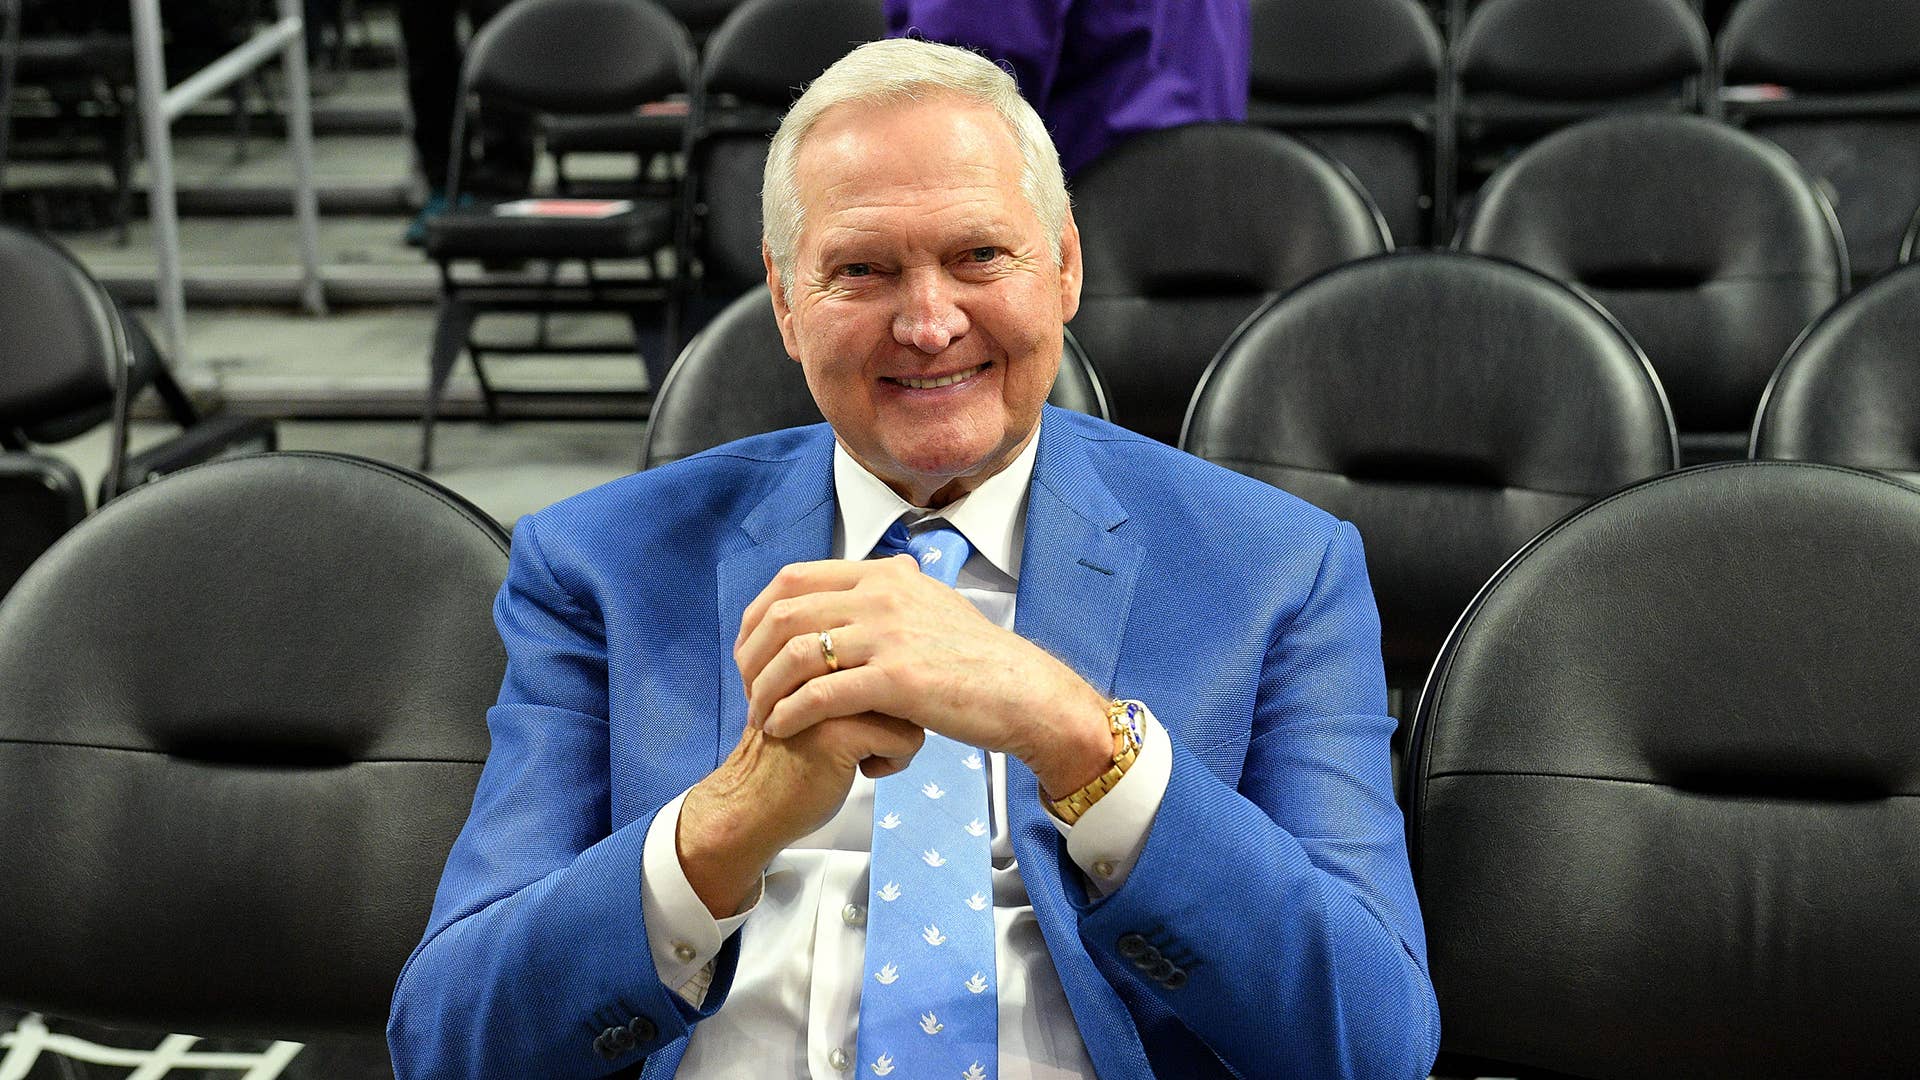 Jerry West attends a basketball game between the Los Angeles Clippers and the Philadelphia 76ers